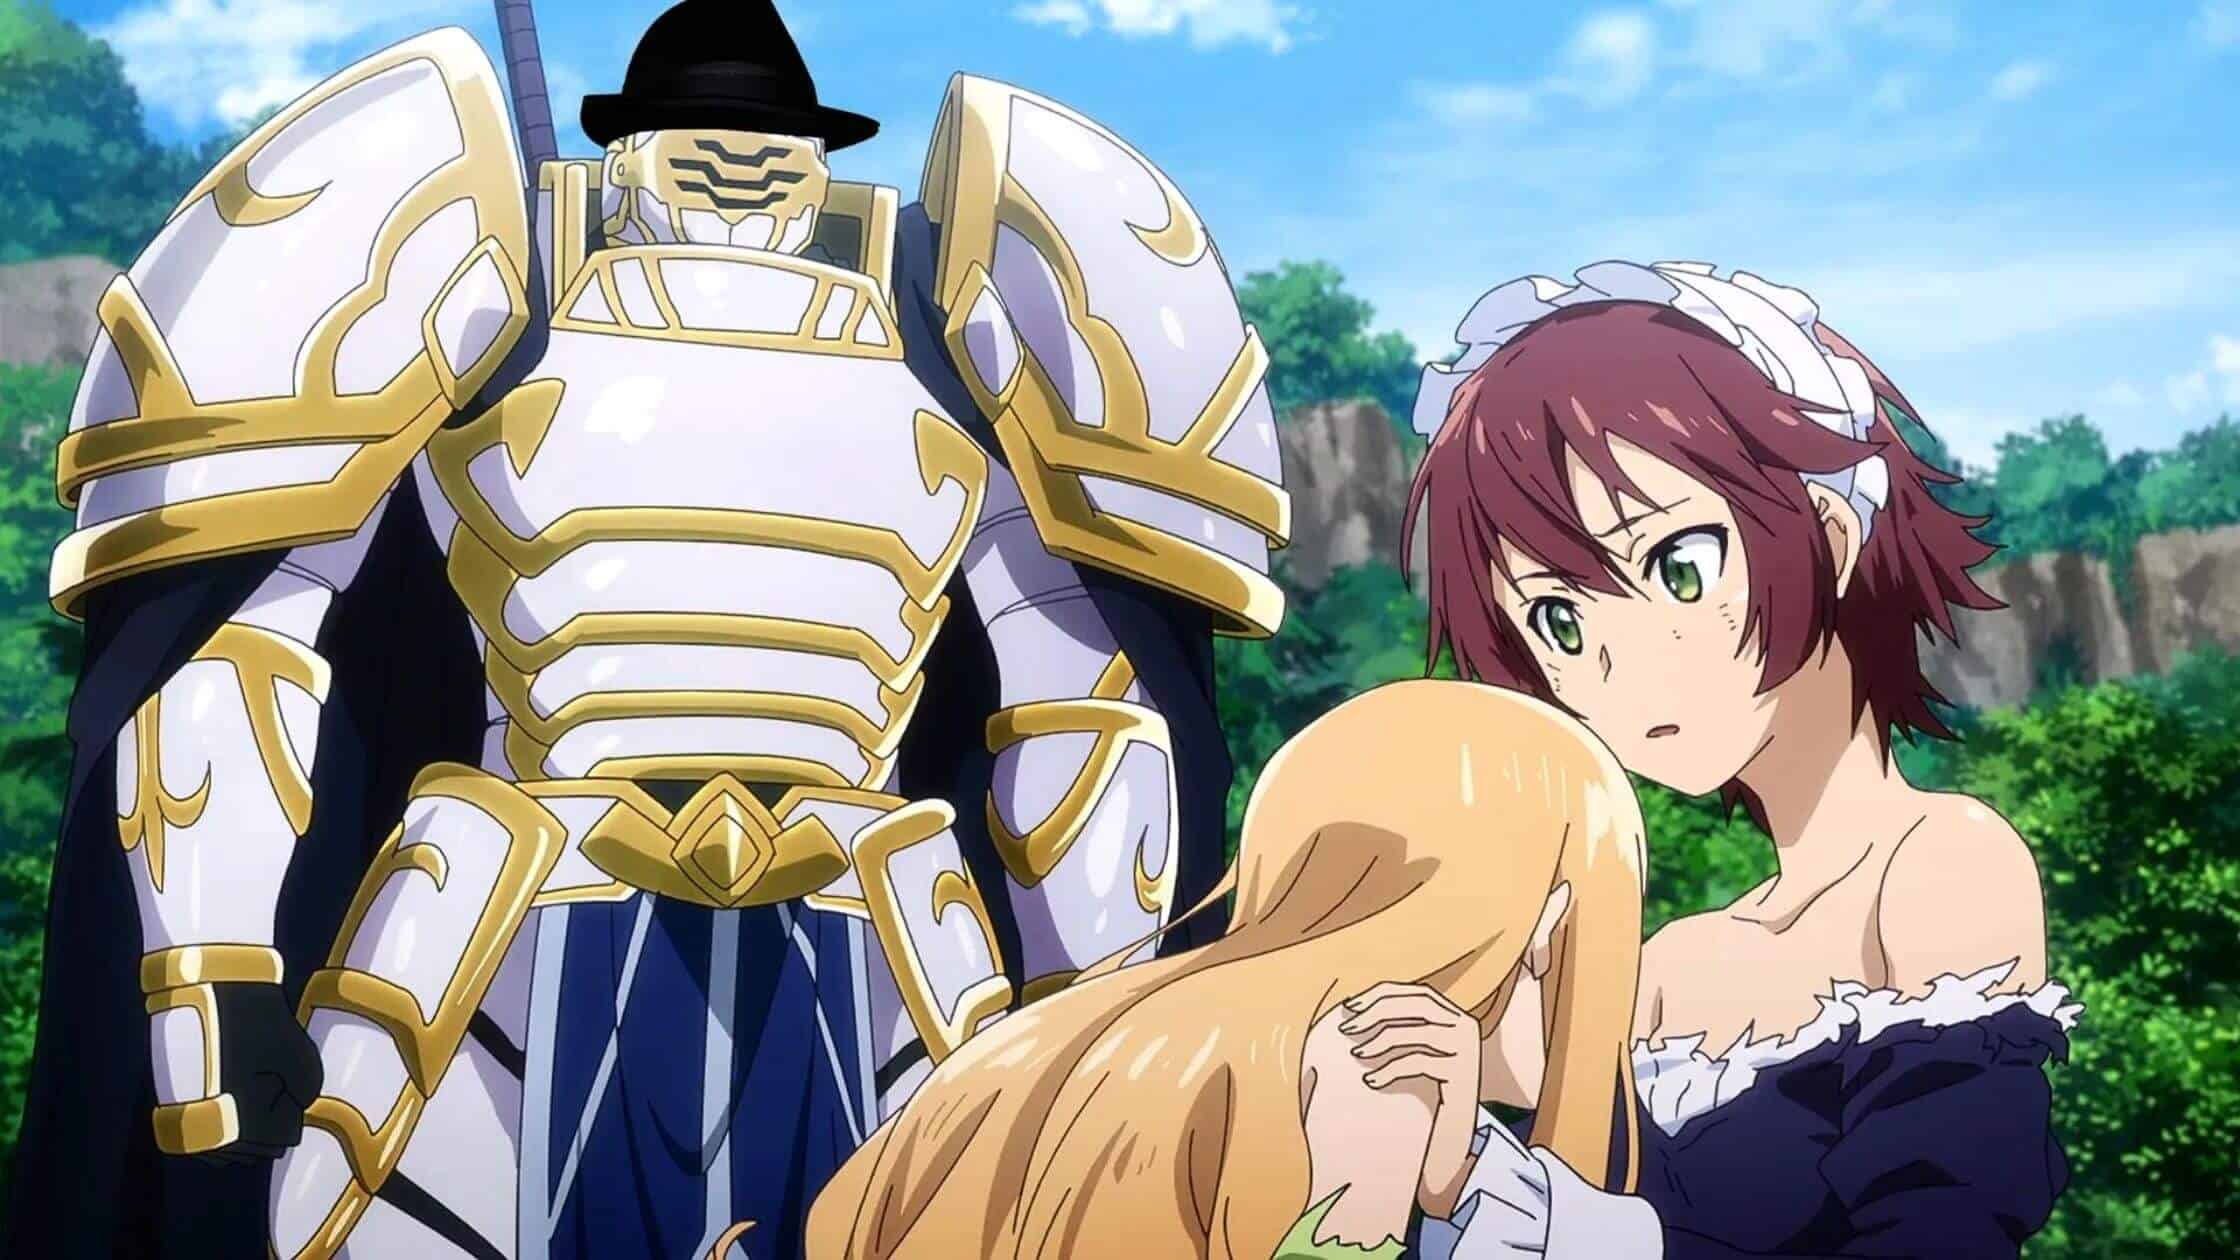 Skeleton Knight In Another World Episode 5 Release Date, And Recap